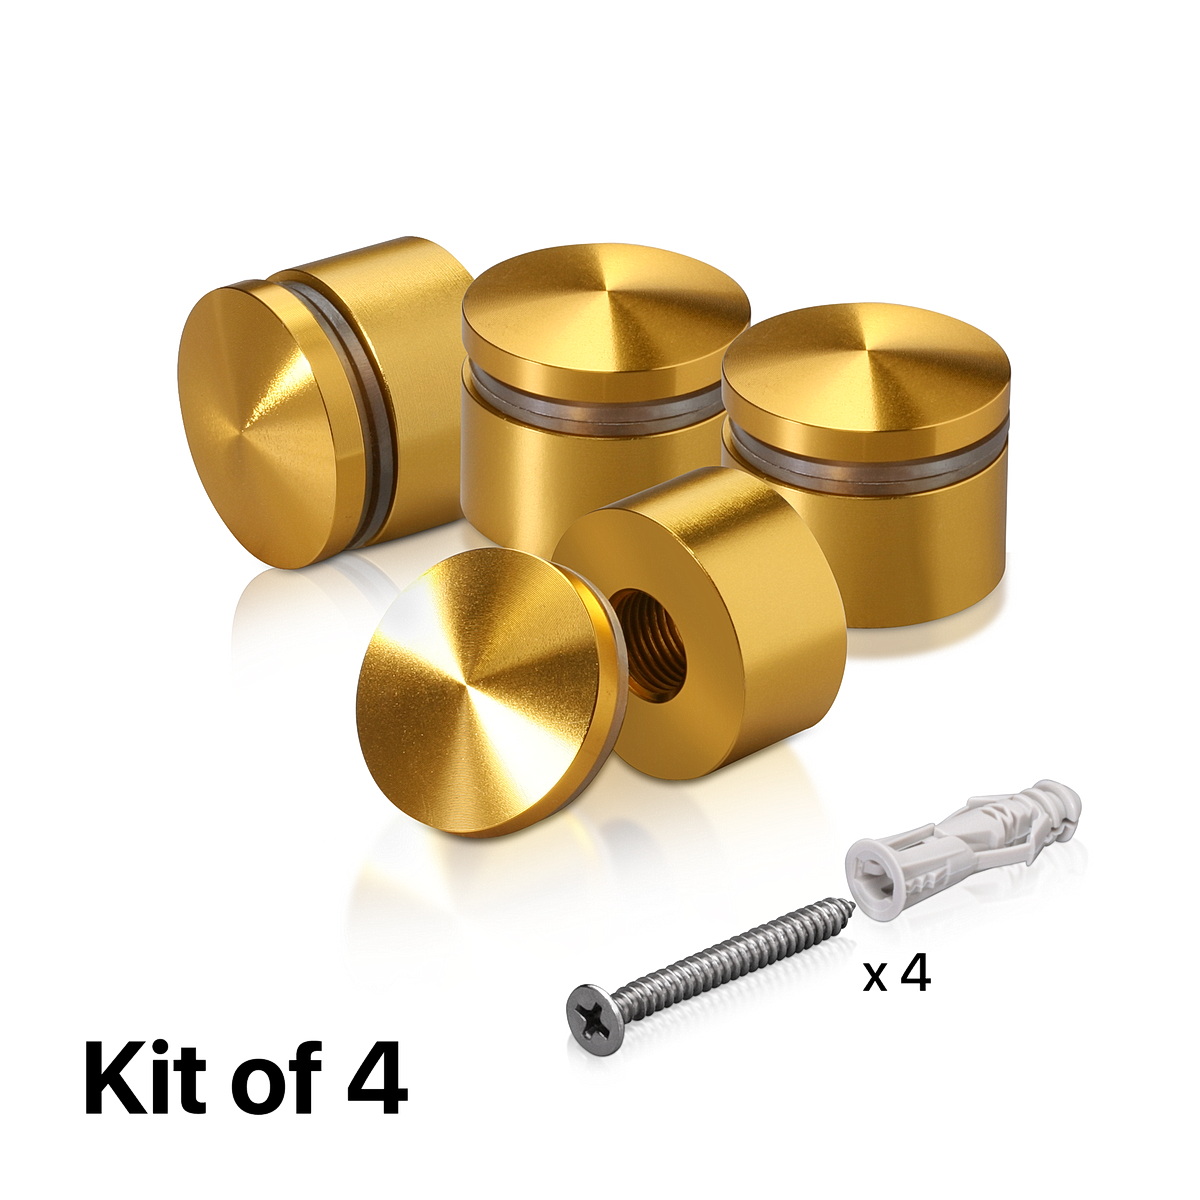 (Set of 4) 1'' Diameter X 1/2'' Barrel Length, Aluminum Rounded Head Standoffs, Gold Anodized Finish Standoff with (4) 2216Z Screws and (4) LANC1 Anchors for concrete or drywall (For Inside / Outside use) [Required Material Hole Size: 7/16'']